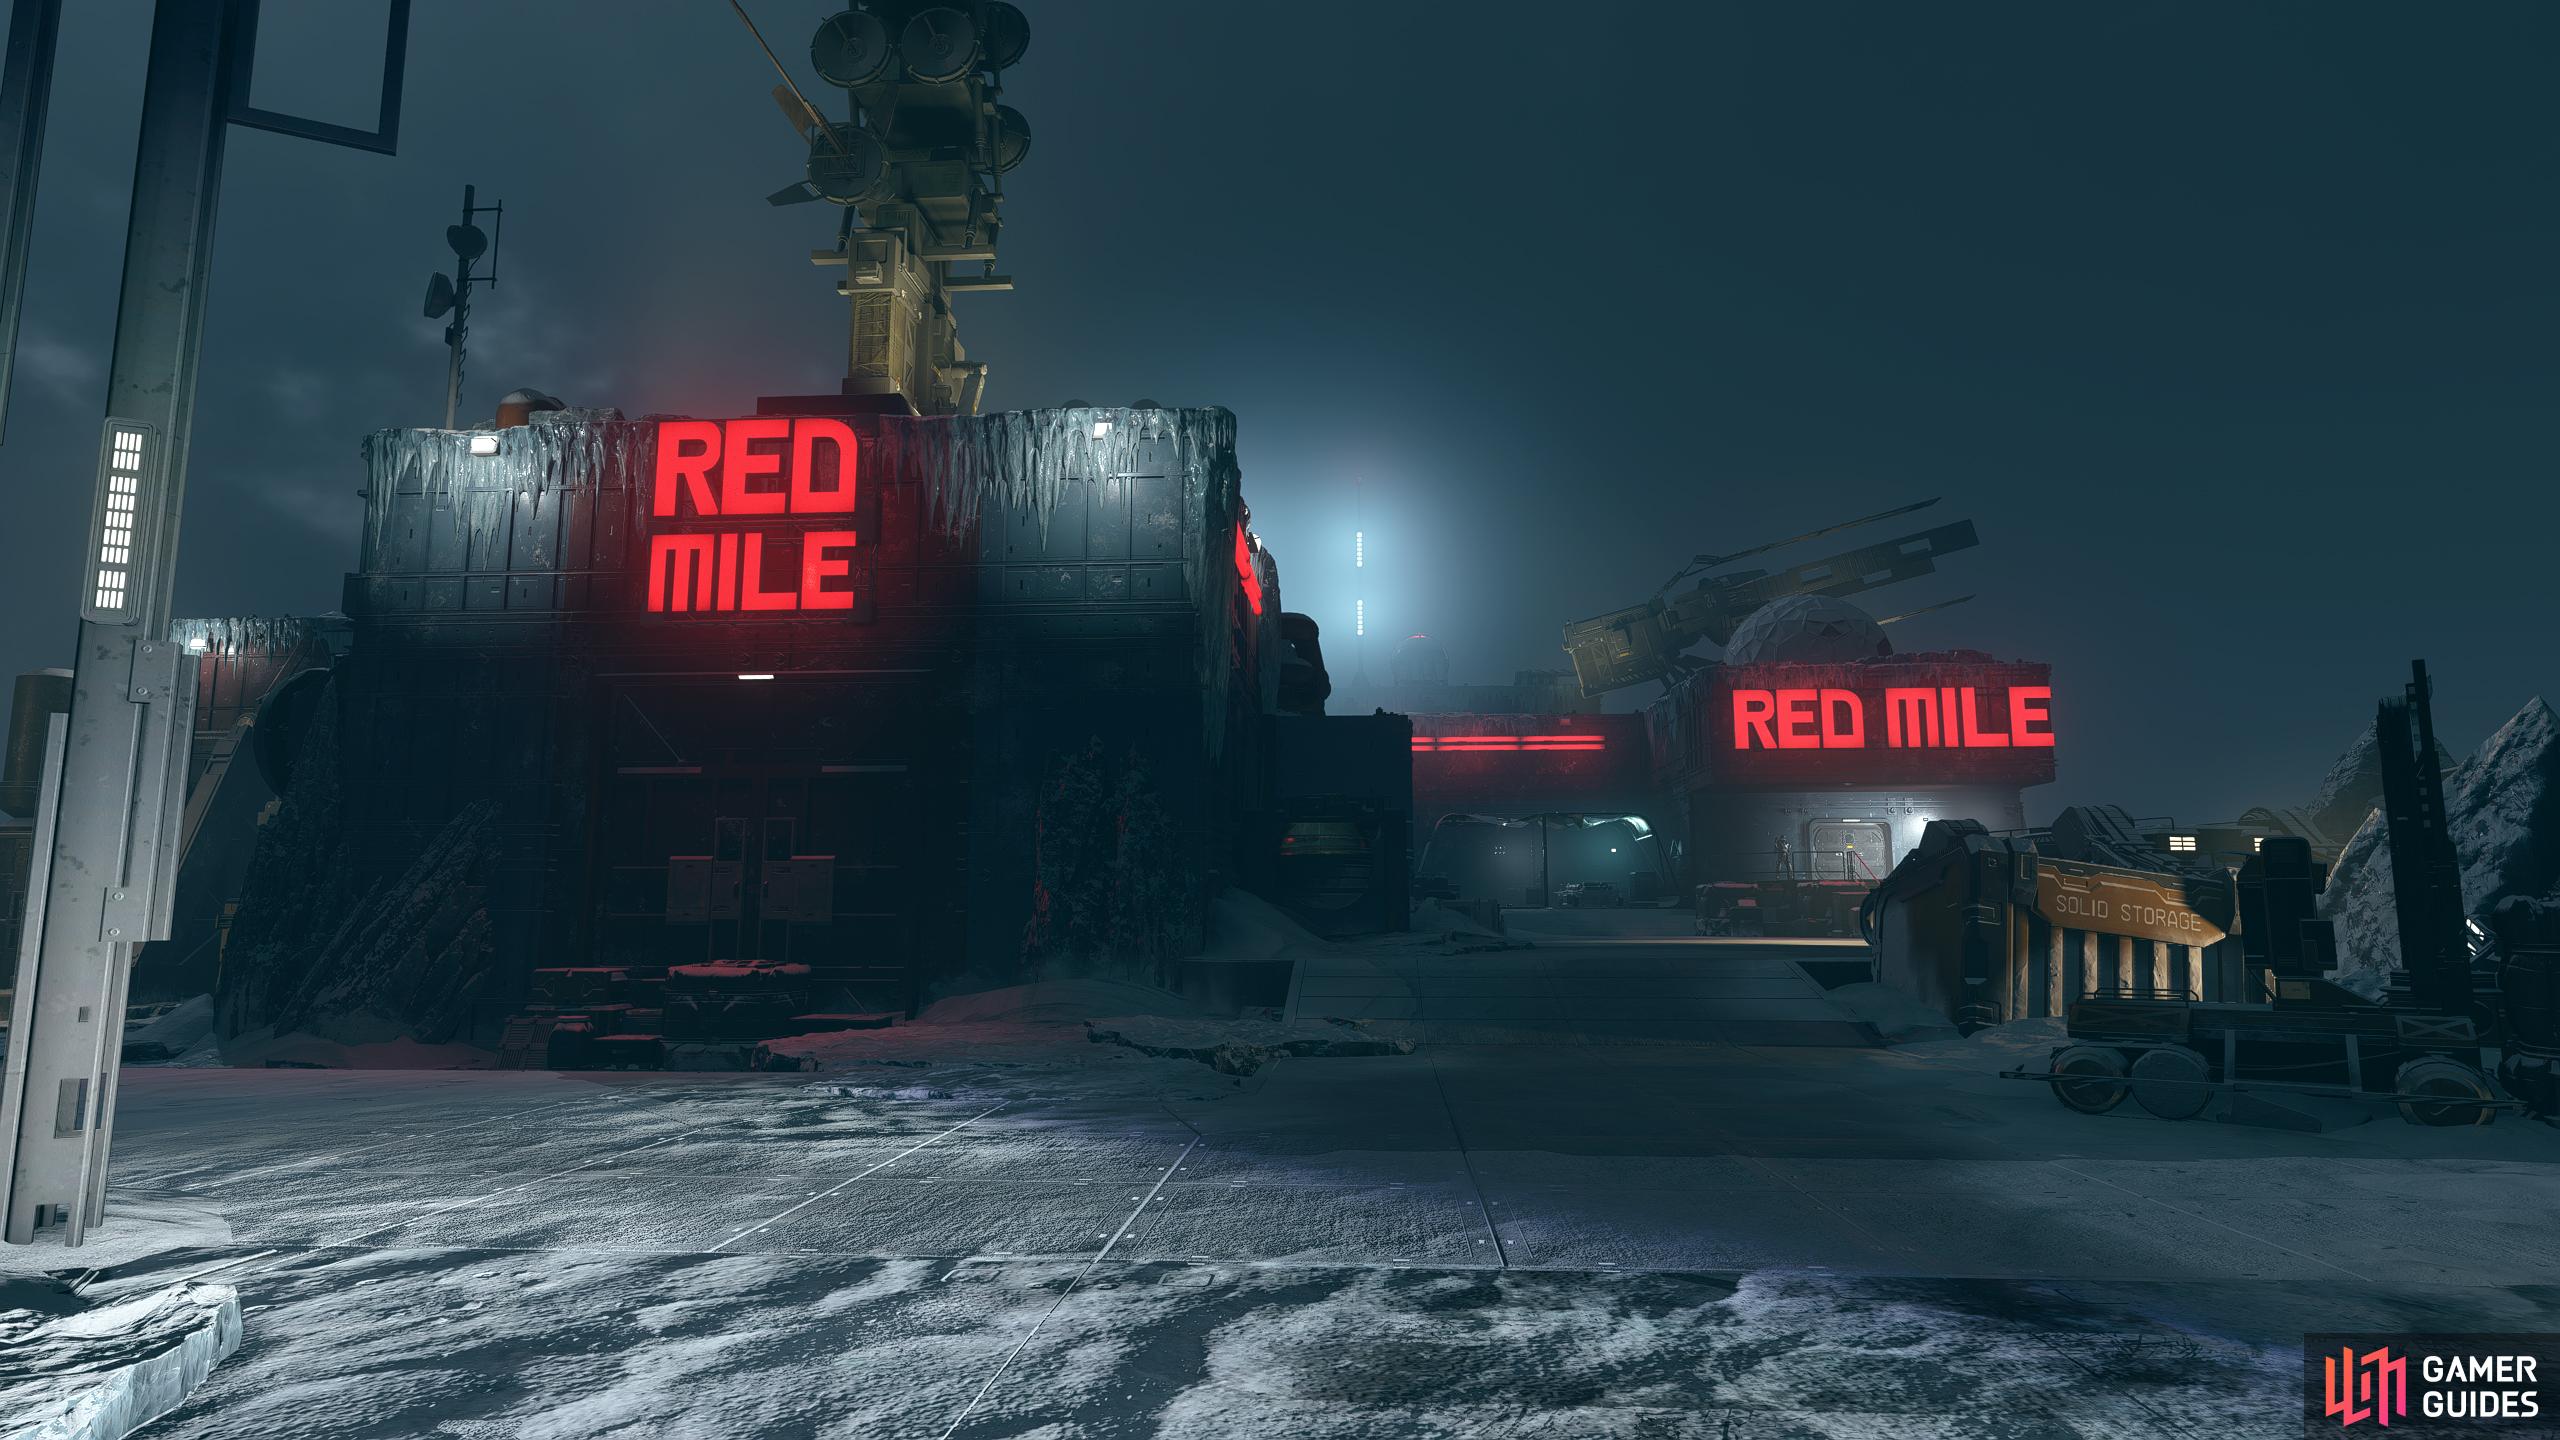 The Red Mile is an Outpost on Porrima III, in the Porrima System. Run the Red Mile is a mission within it.